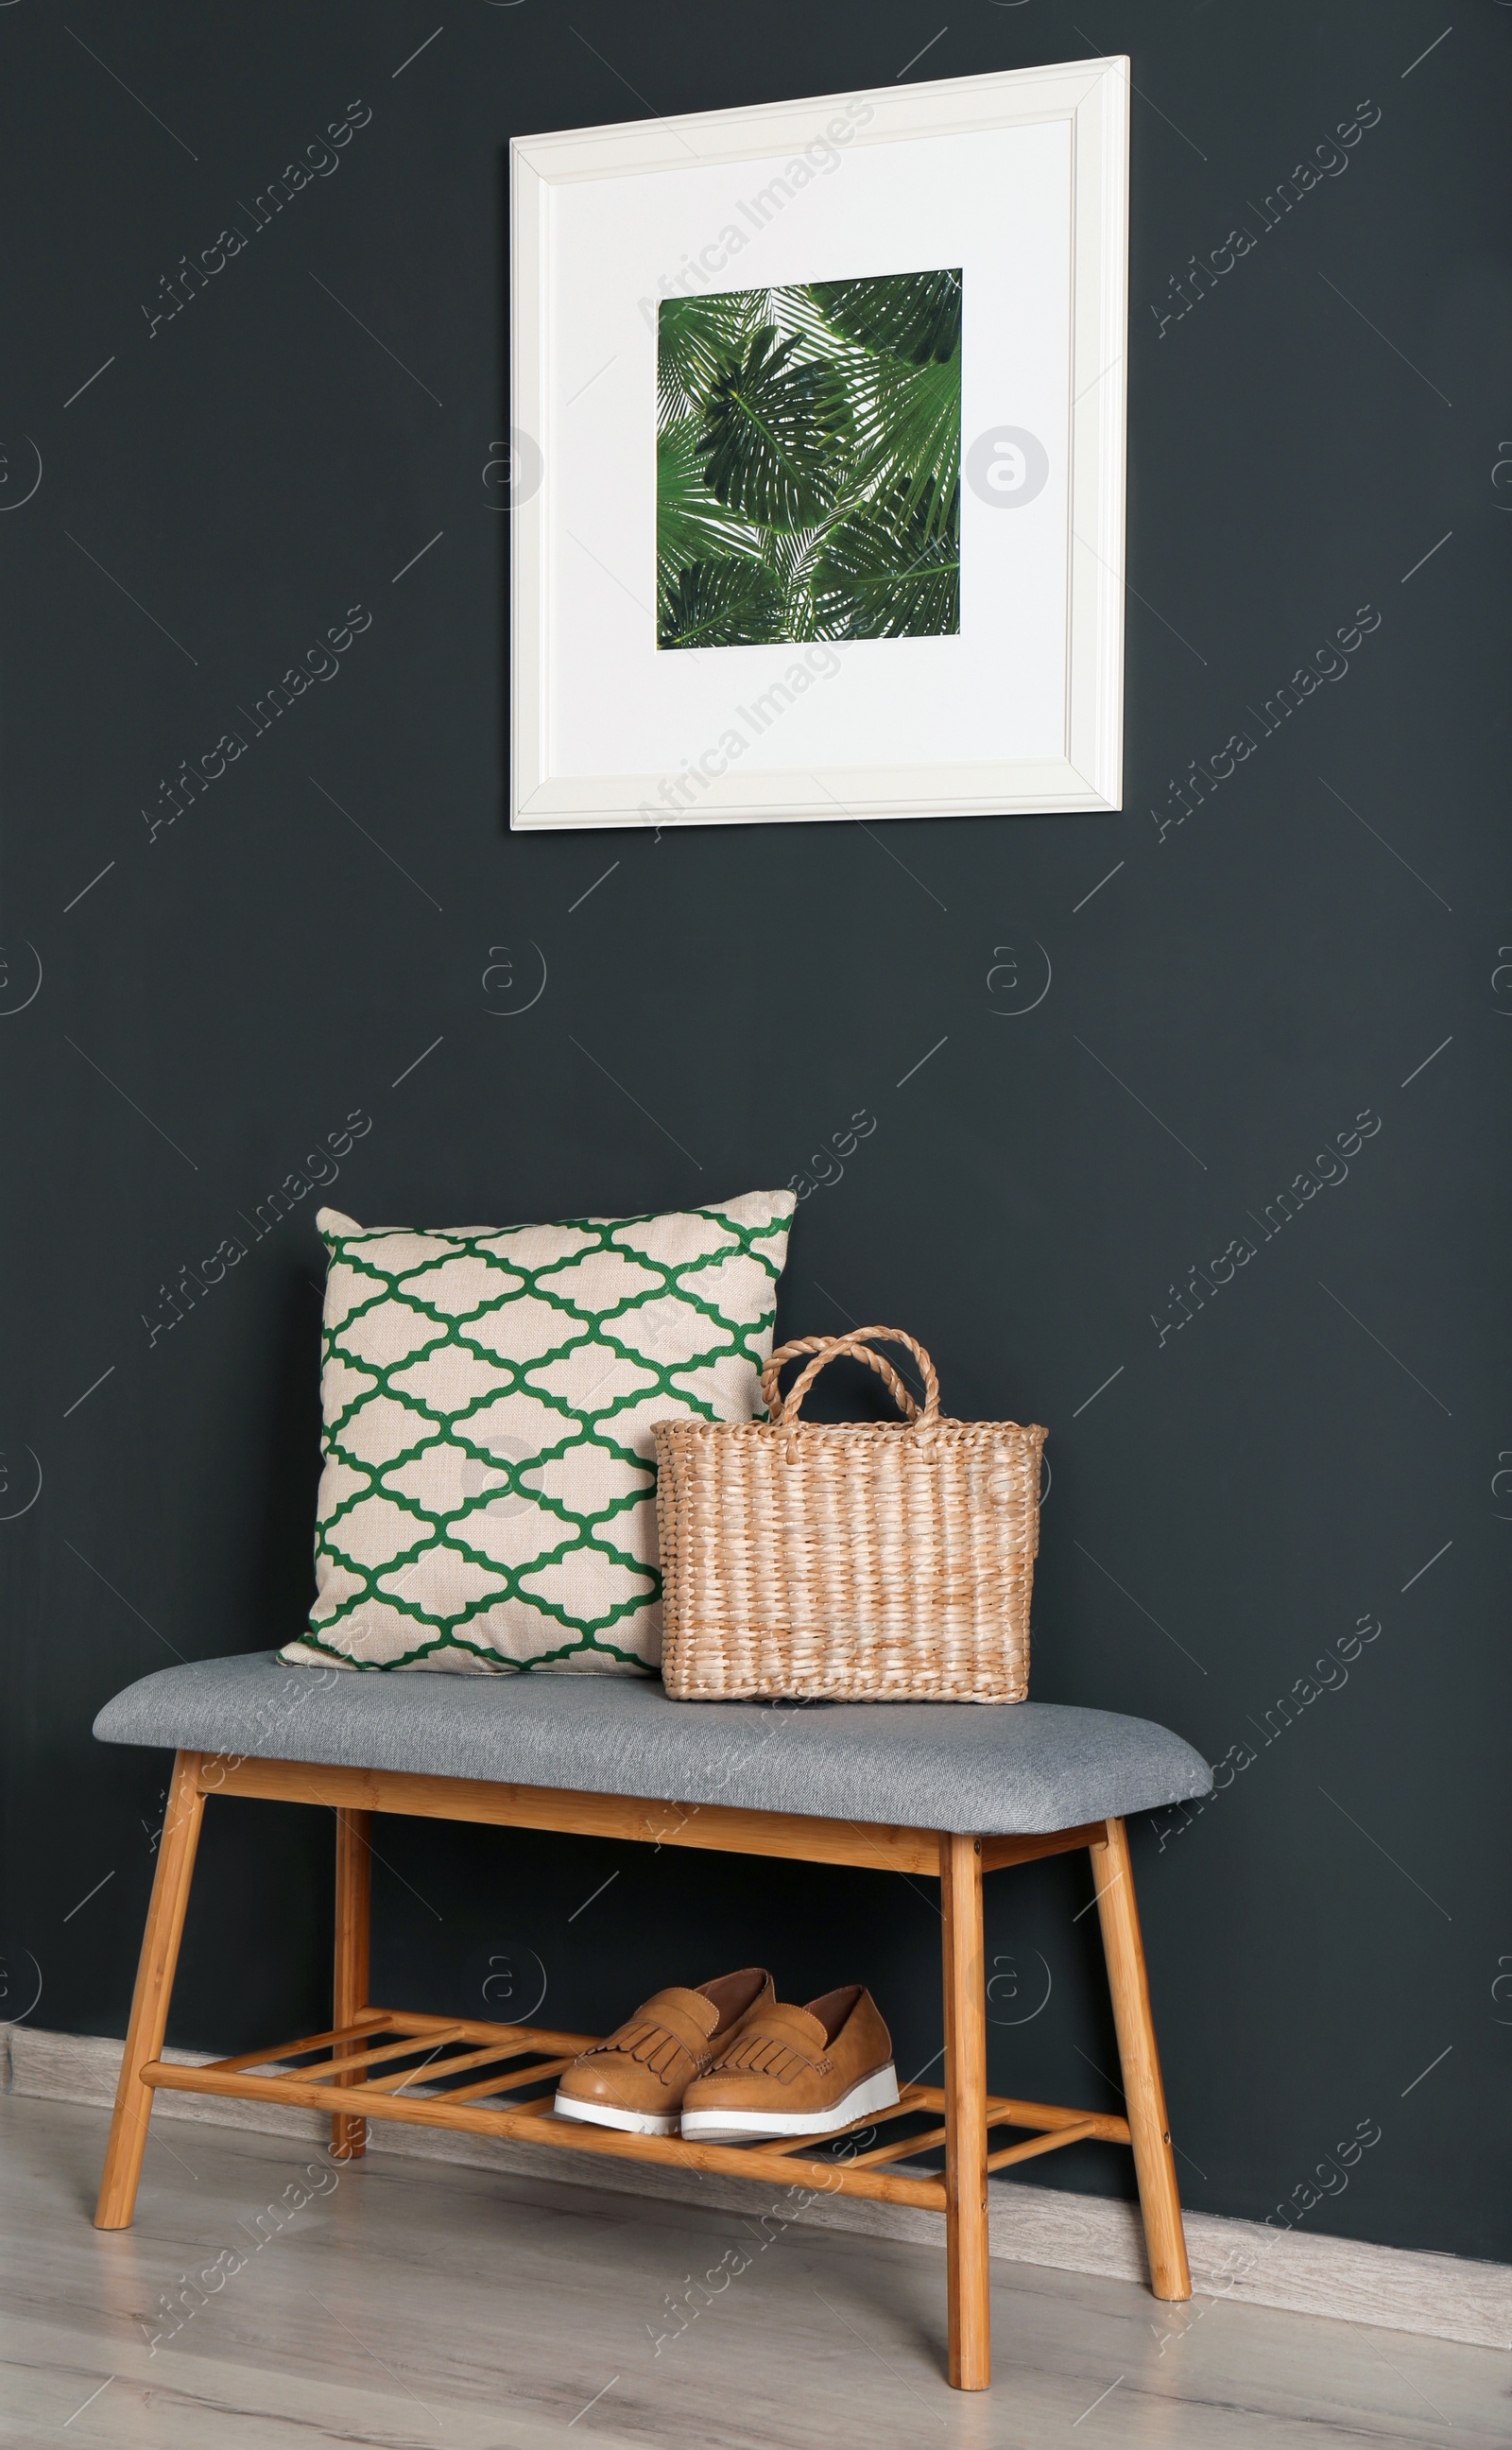 Photo of Bench with pillow and bag at black wall. Interior design